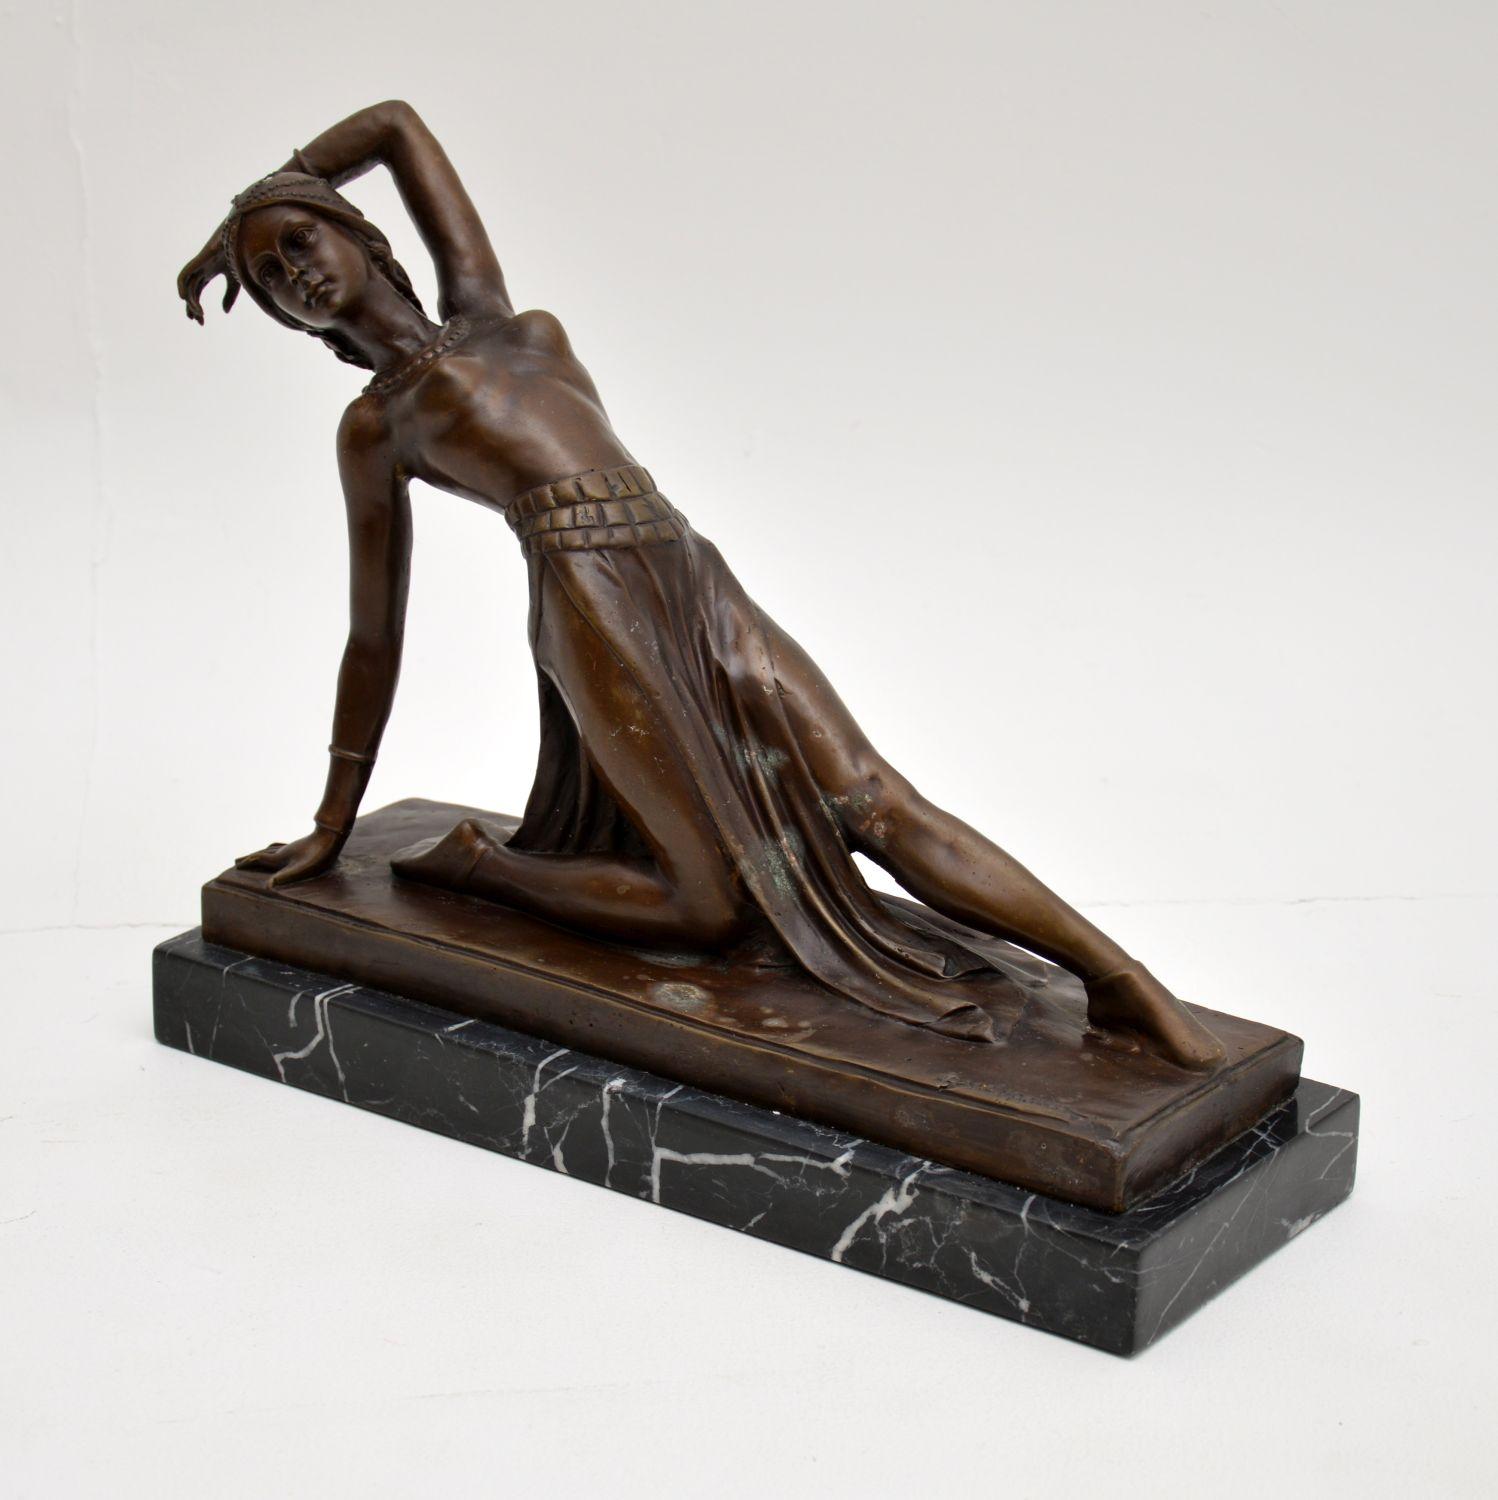 A wonderful Art Deco style bronze figure of a dancer, signed by the famous artist DH Chiparus.

This is a later recast of the original, it has some age to it and probably dates from the mid-20th century possibly 1950s-1960s.

It is beautifully